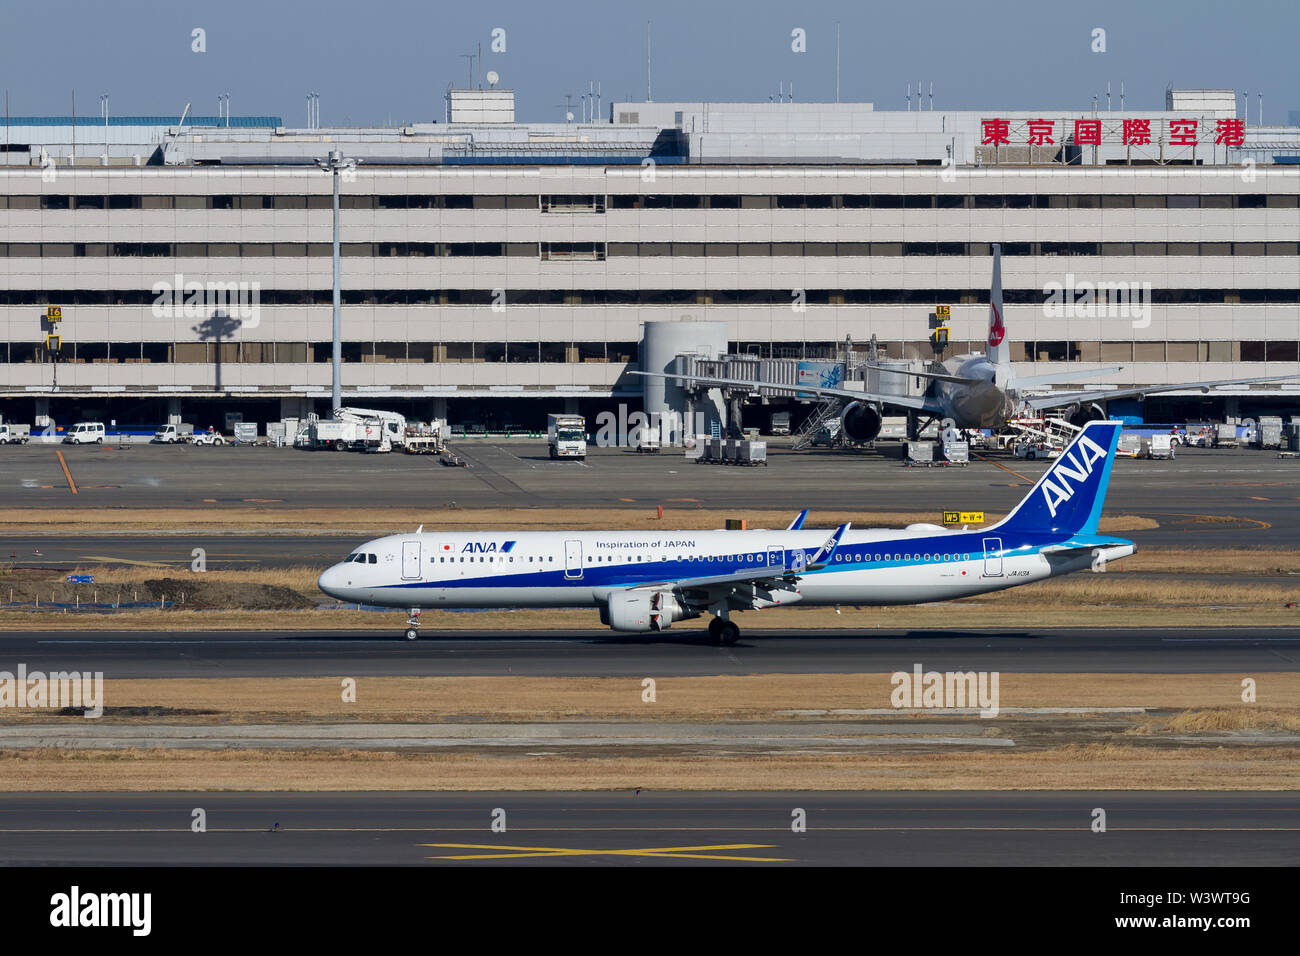 An All Nippon Airways Ana Airbus A321 211 At Haneda International Airport Tokyo Japan Friday February 1st 19 Stock Photo Alamy